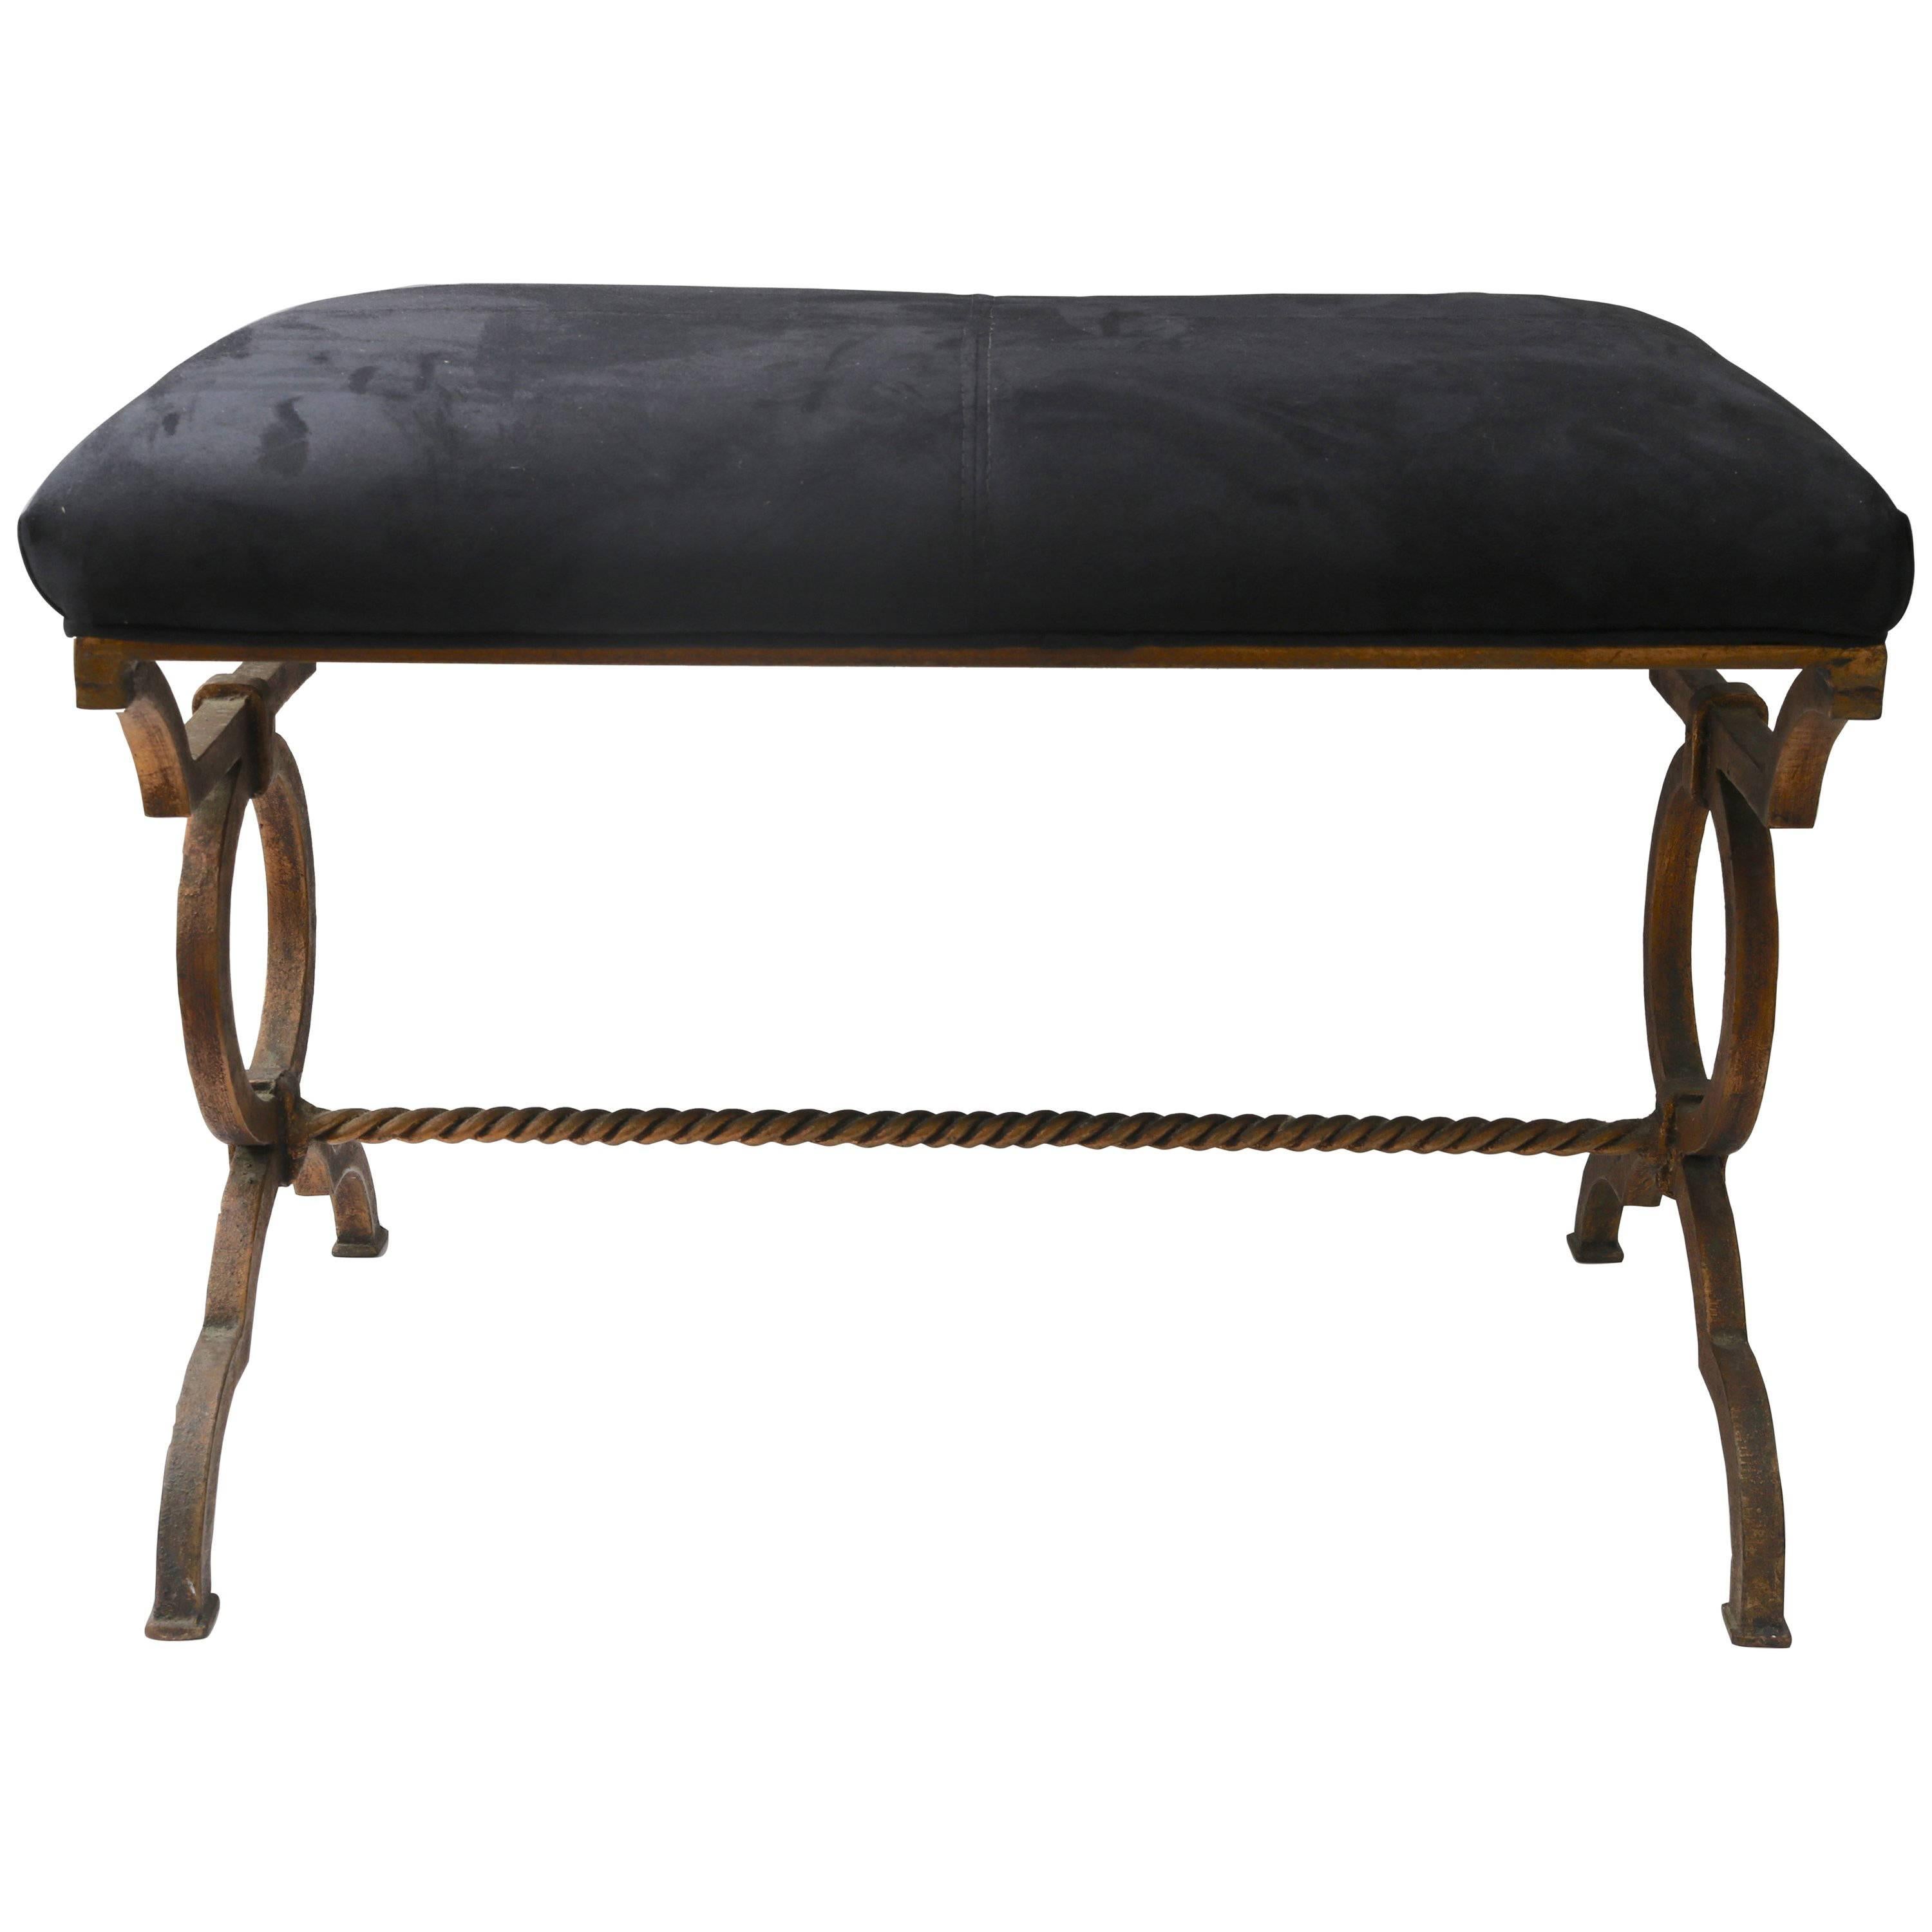 Gilt Gold Bronze Bench with Black Suede Upholstery